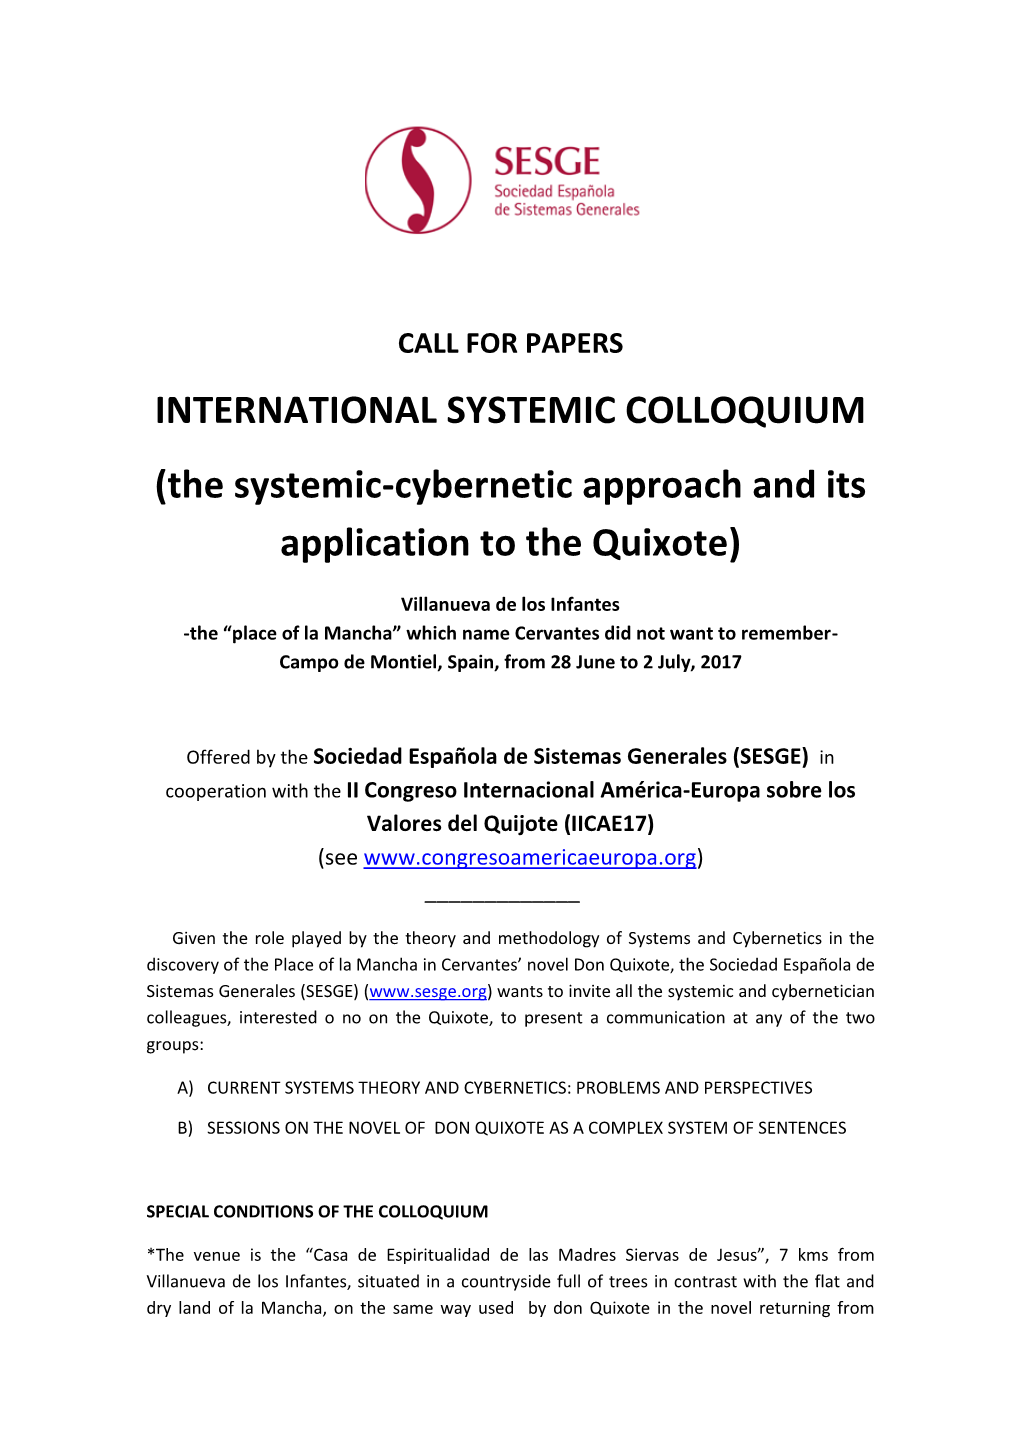 INTERNATIONAL SYSTEMIC COLLOQUIUM (The Systemic-Cybernetic Approach and Its Application to the Quixote)